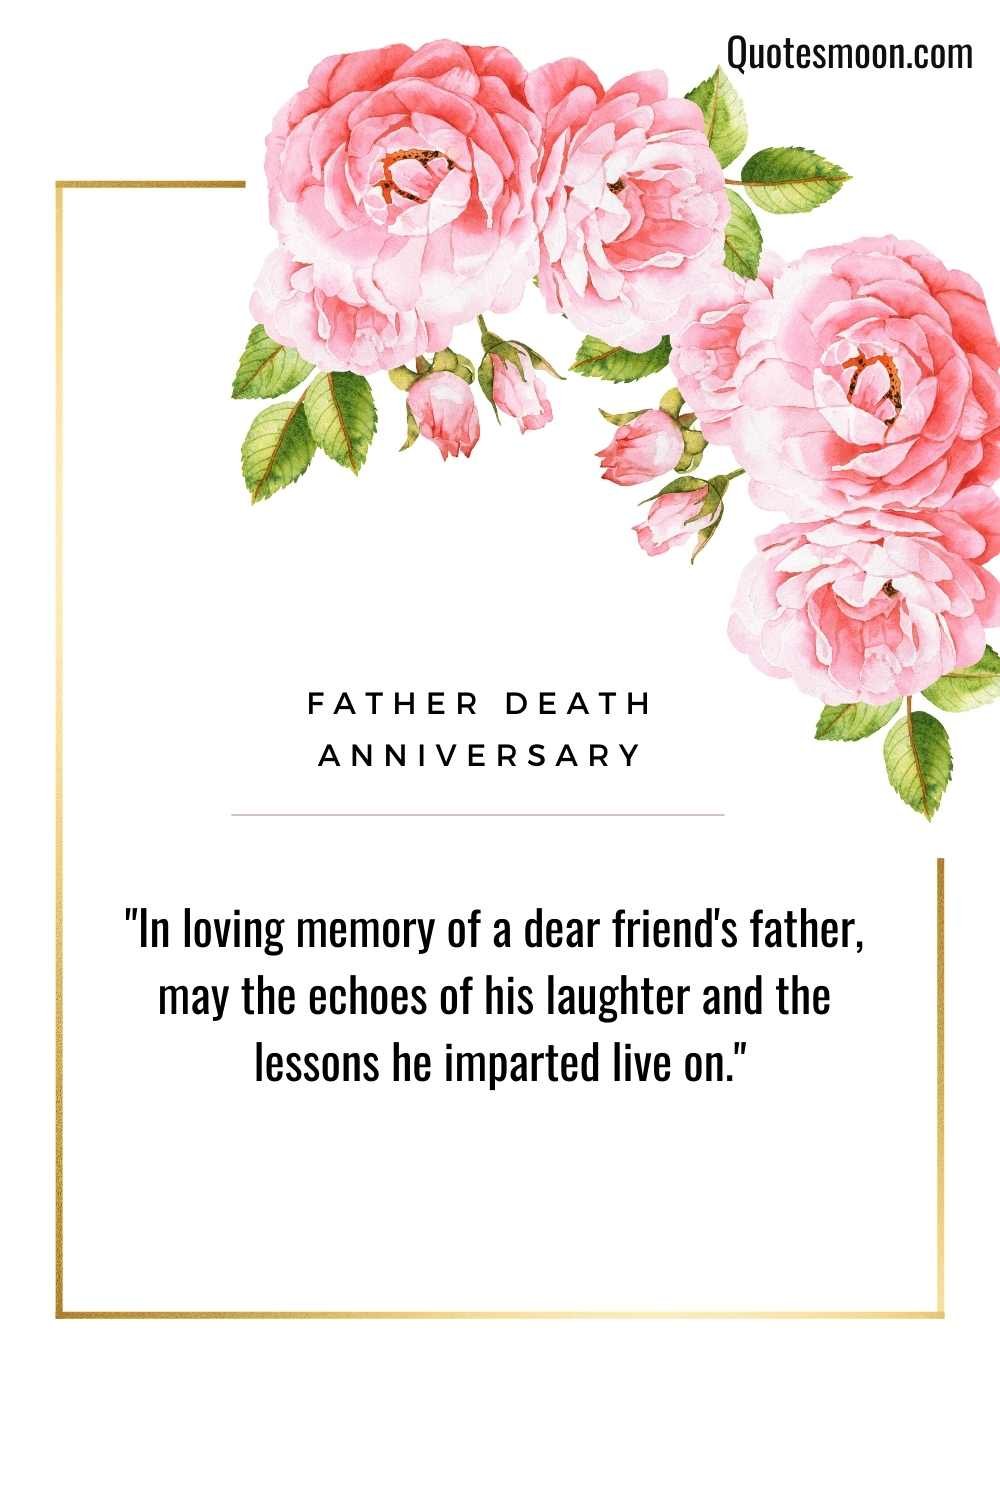 Father Death Anniversary Quotes and Messages